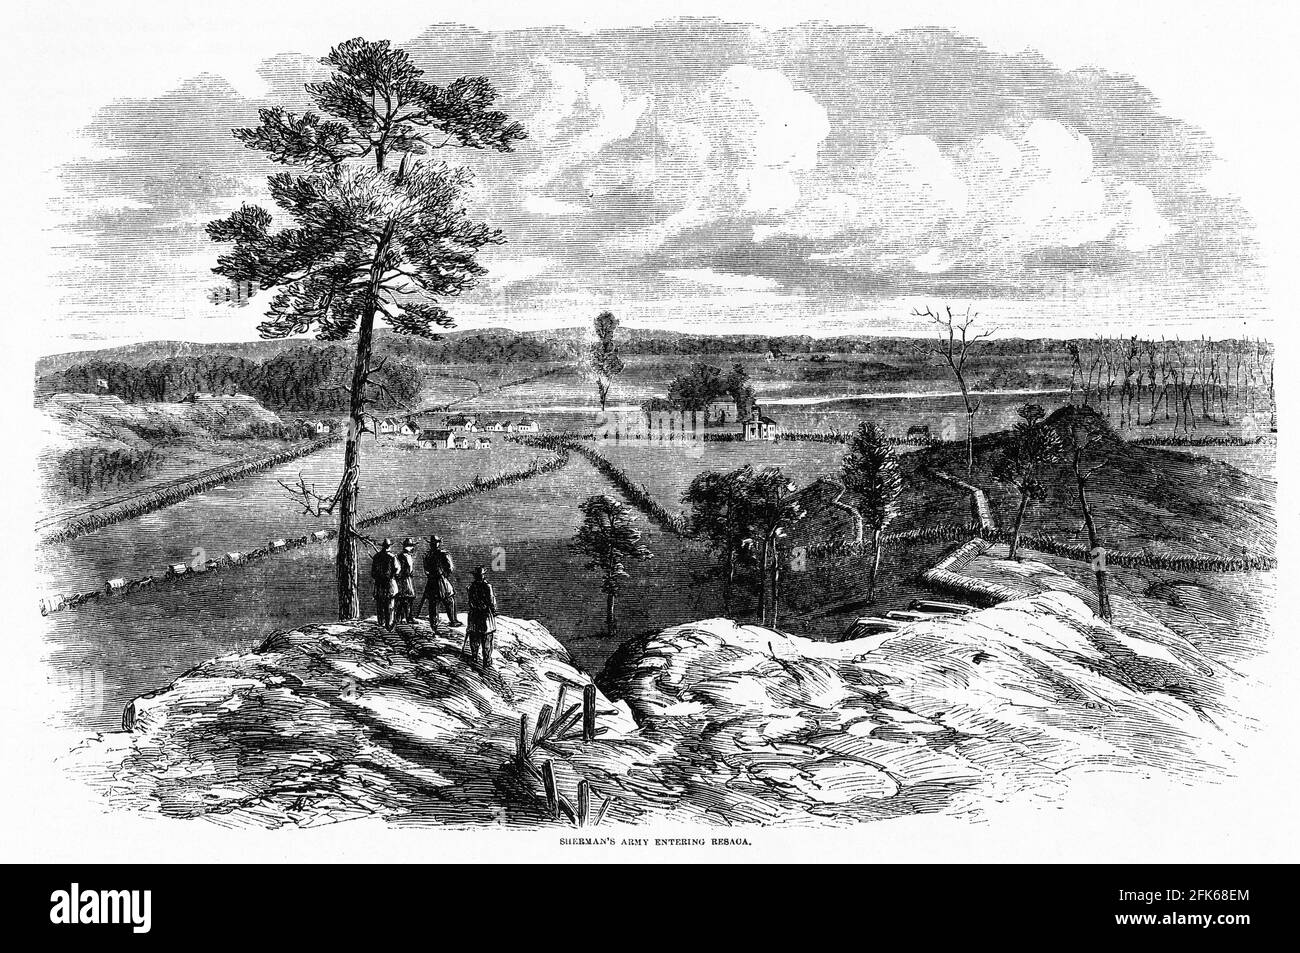 Engraving of Sherman's army entering Resaca during the American civil war: Stock Photo